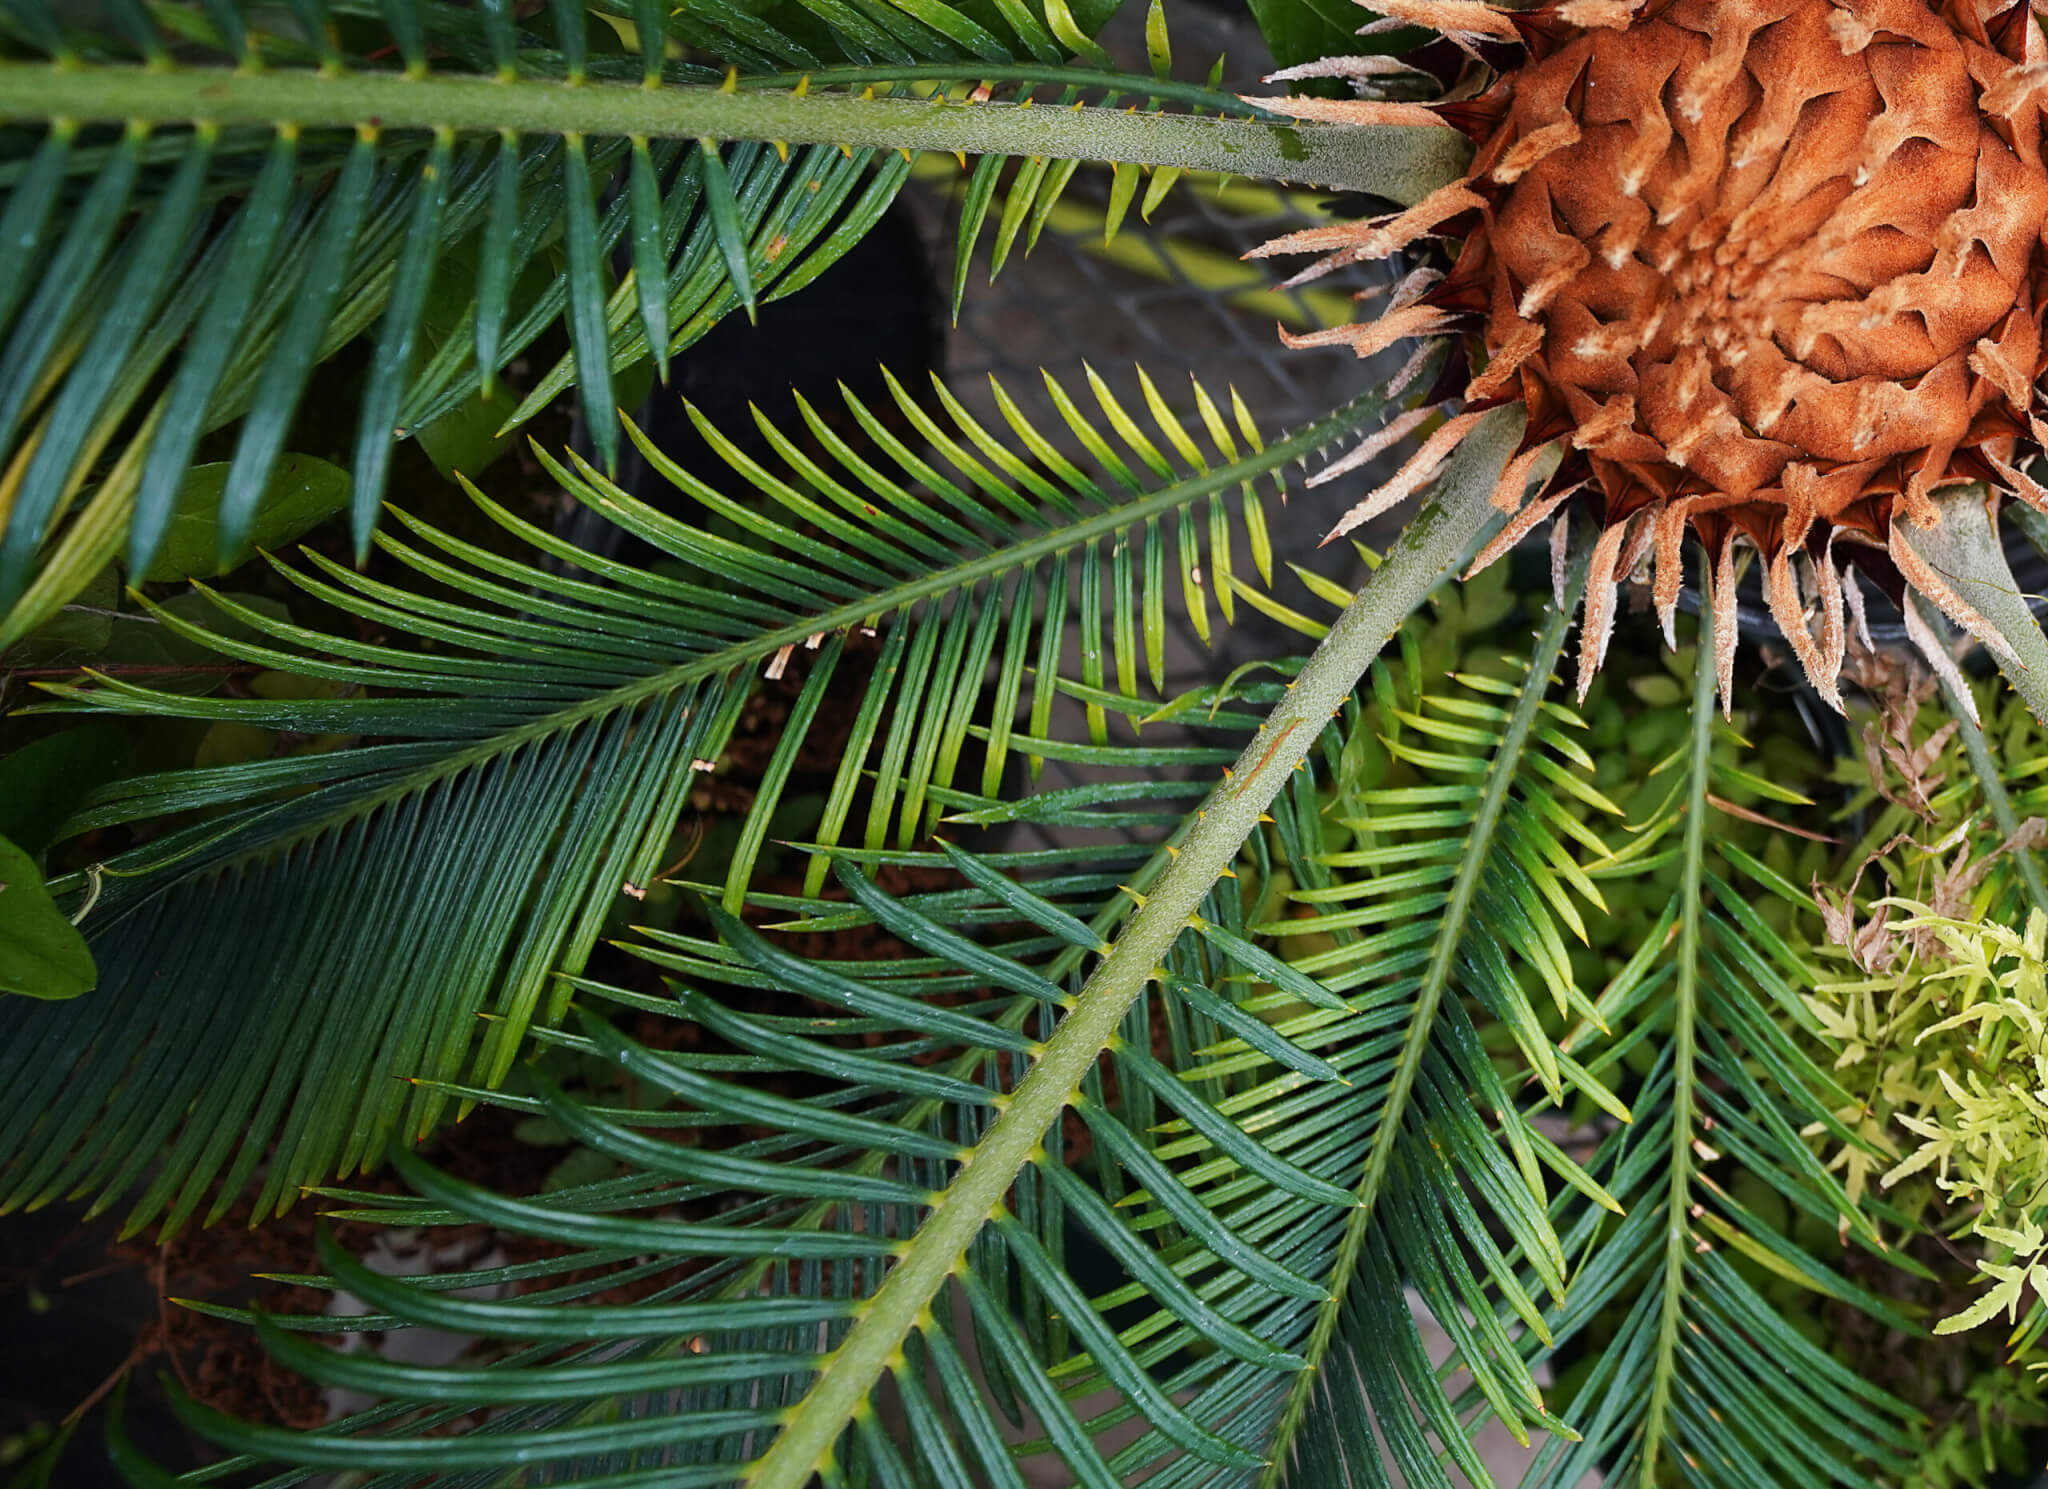 The trunk and leaves of Cycas revoluta, a native of Japan and a distant relative of conifers. The cycads have largely remained unchanged for 280 million years. (Purdue University photo/Tom Campbell)